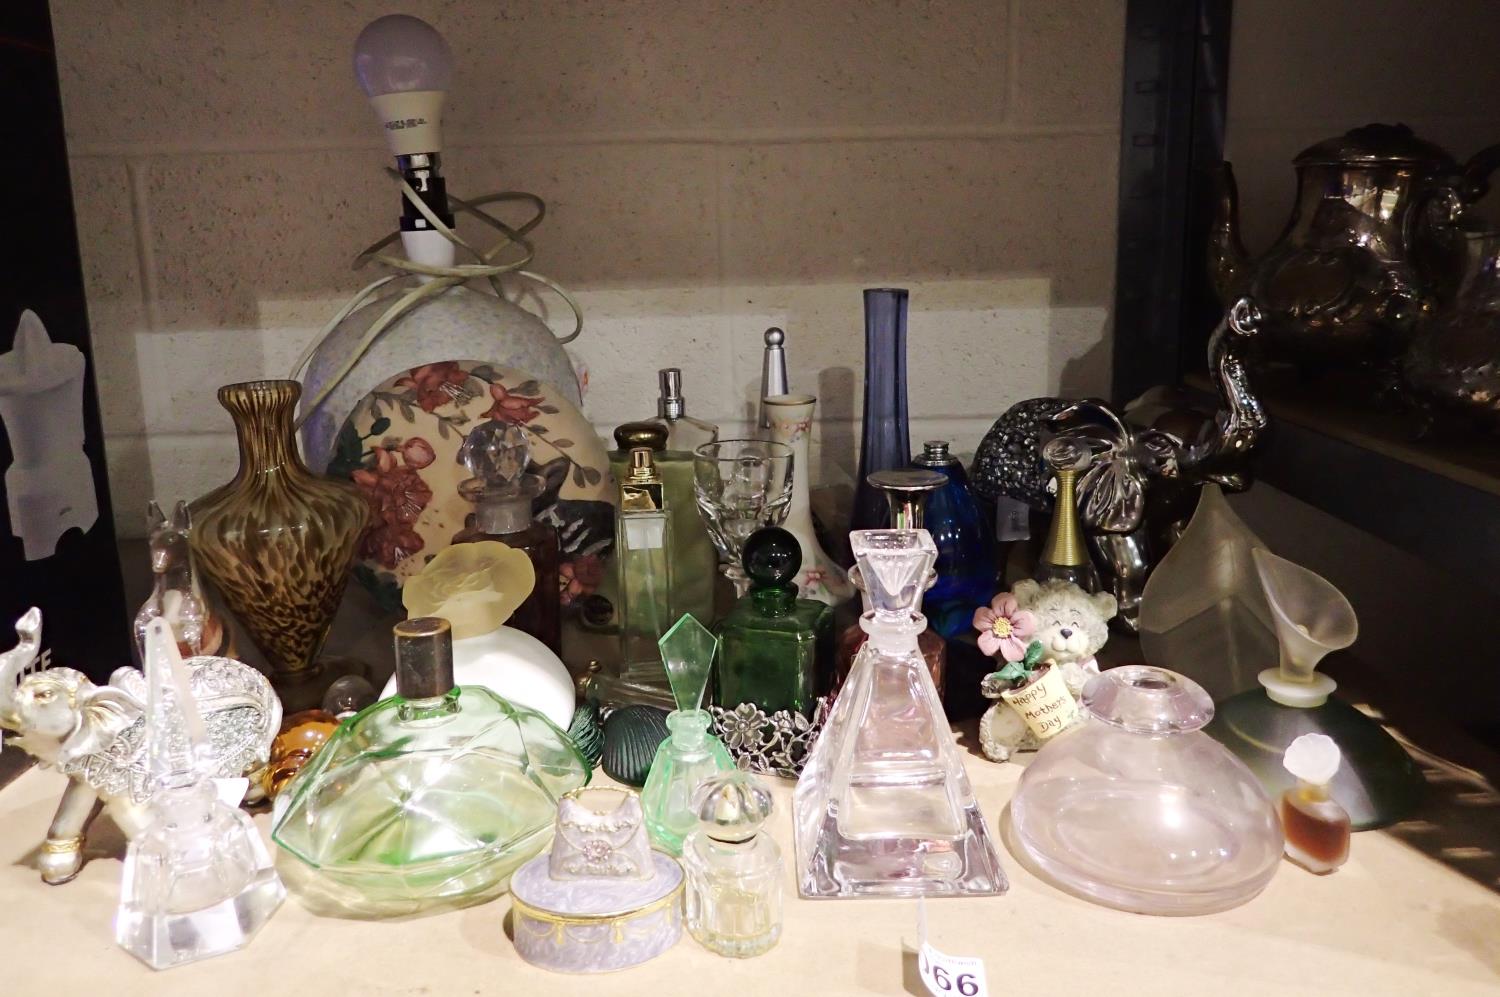 Quantity of mixed ceramics and glass, mainly empty perfume bottles including Jean Paul Gaultier. Not